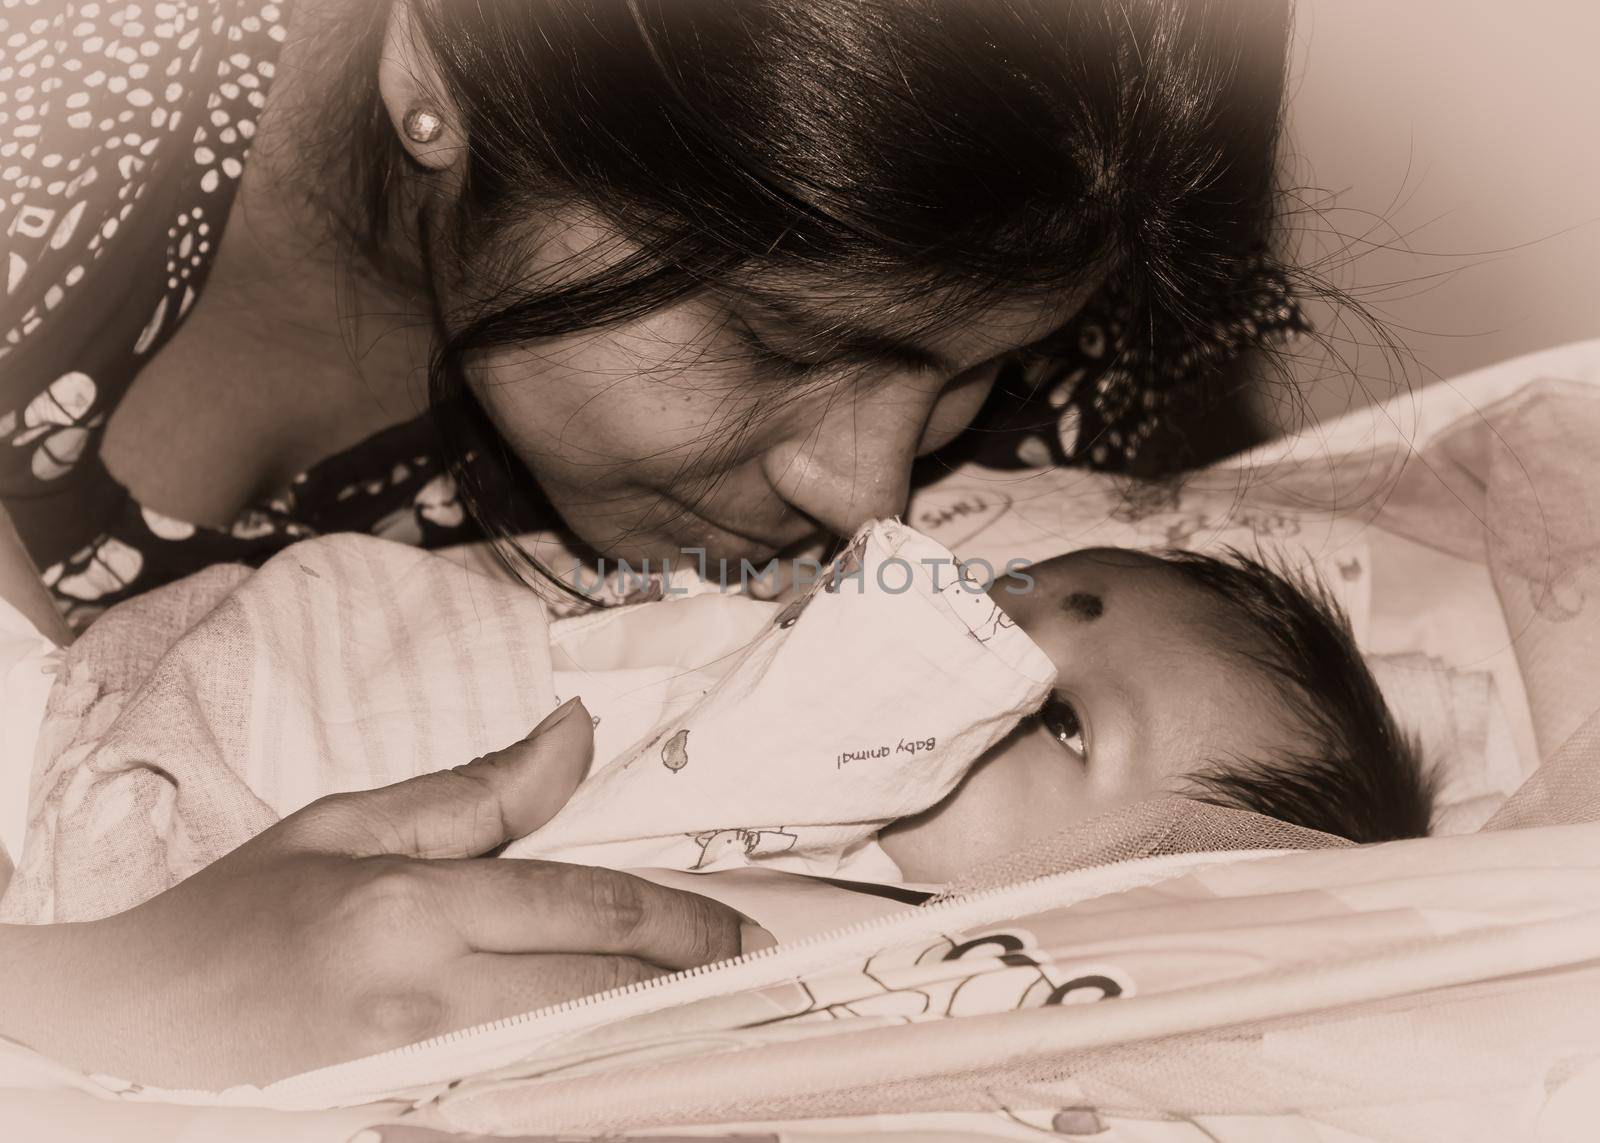 Cute newborn baby boy kissed by mother in her mother lap lying on bed. Close up. One month old Sweet little infant toddler. Indian ethnicity. Front view. Happy mother’s day background image.